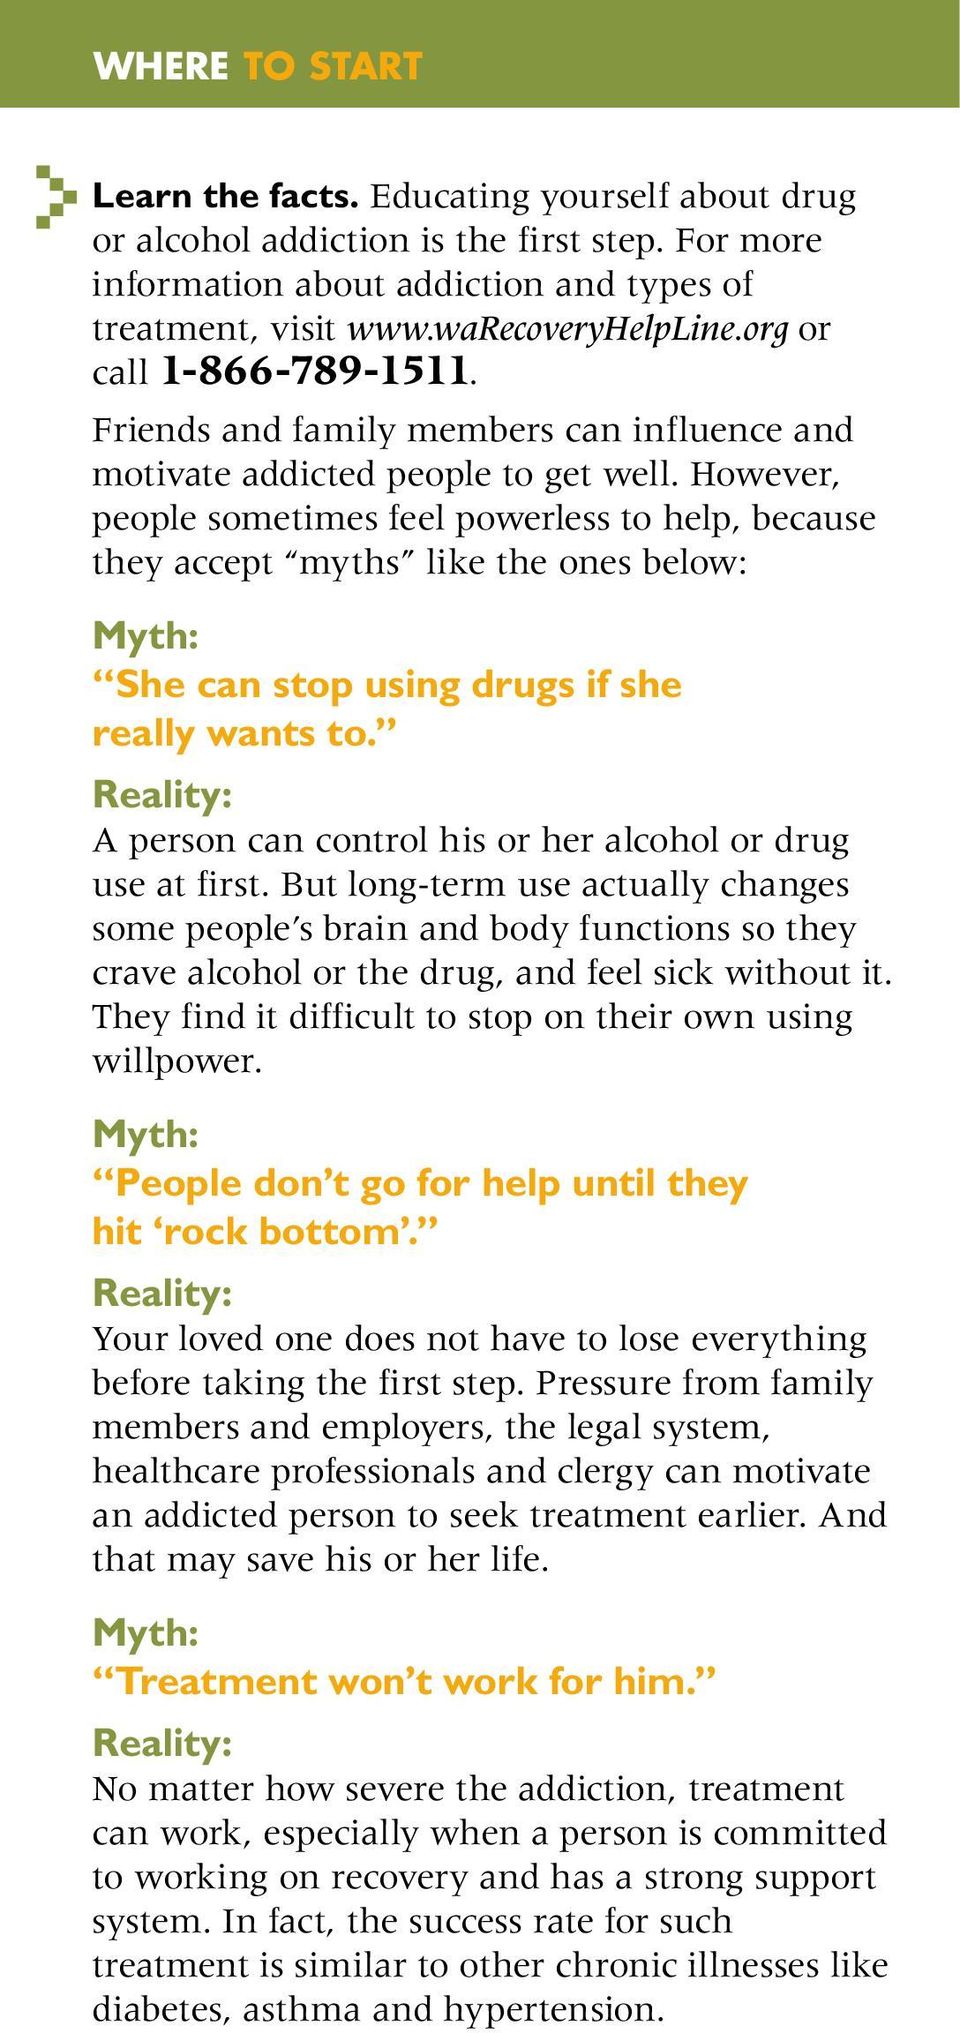 However, people sometimes feel powerless to help, because they accept myths like the ones below: Myth: She can stop using drugs if she really wants to.